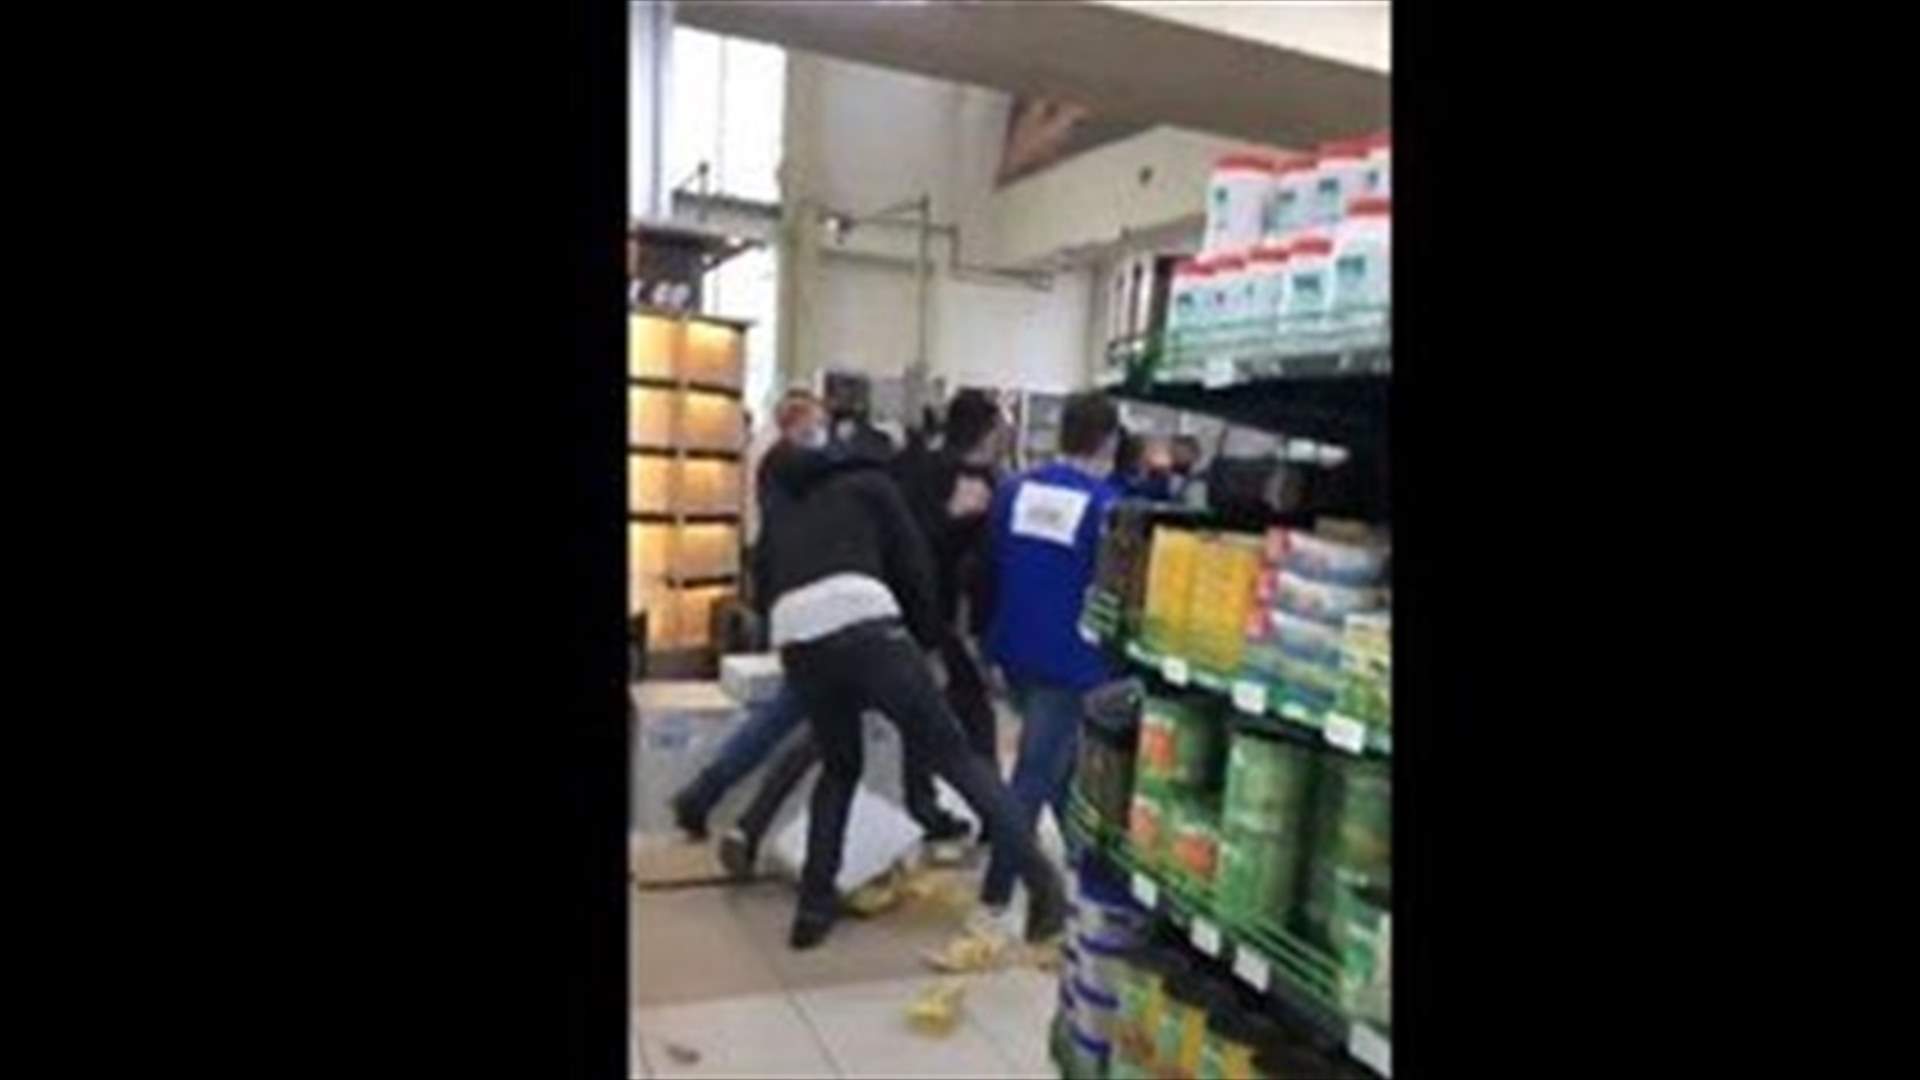 Fight breaks out inside supermarket over subsidized items-[VIDEO]